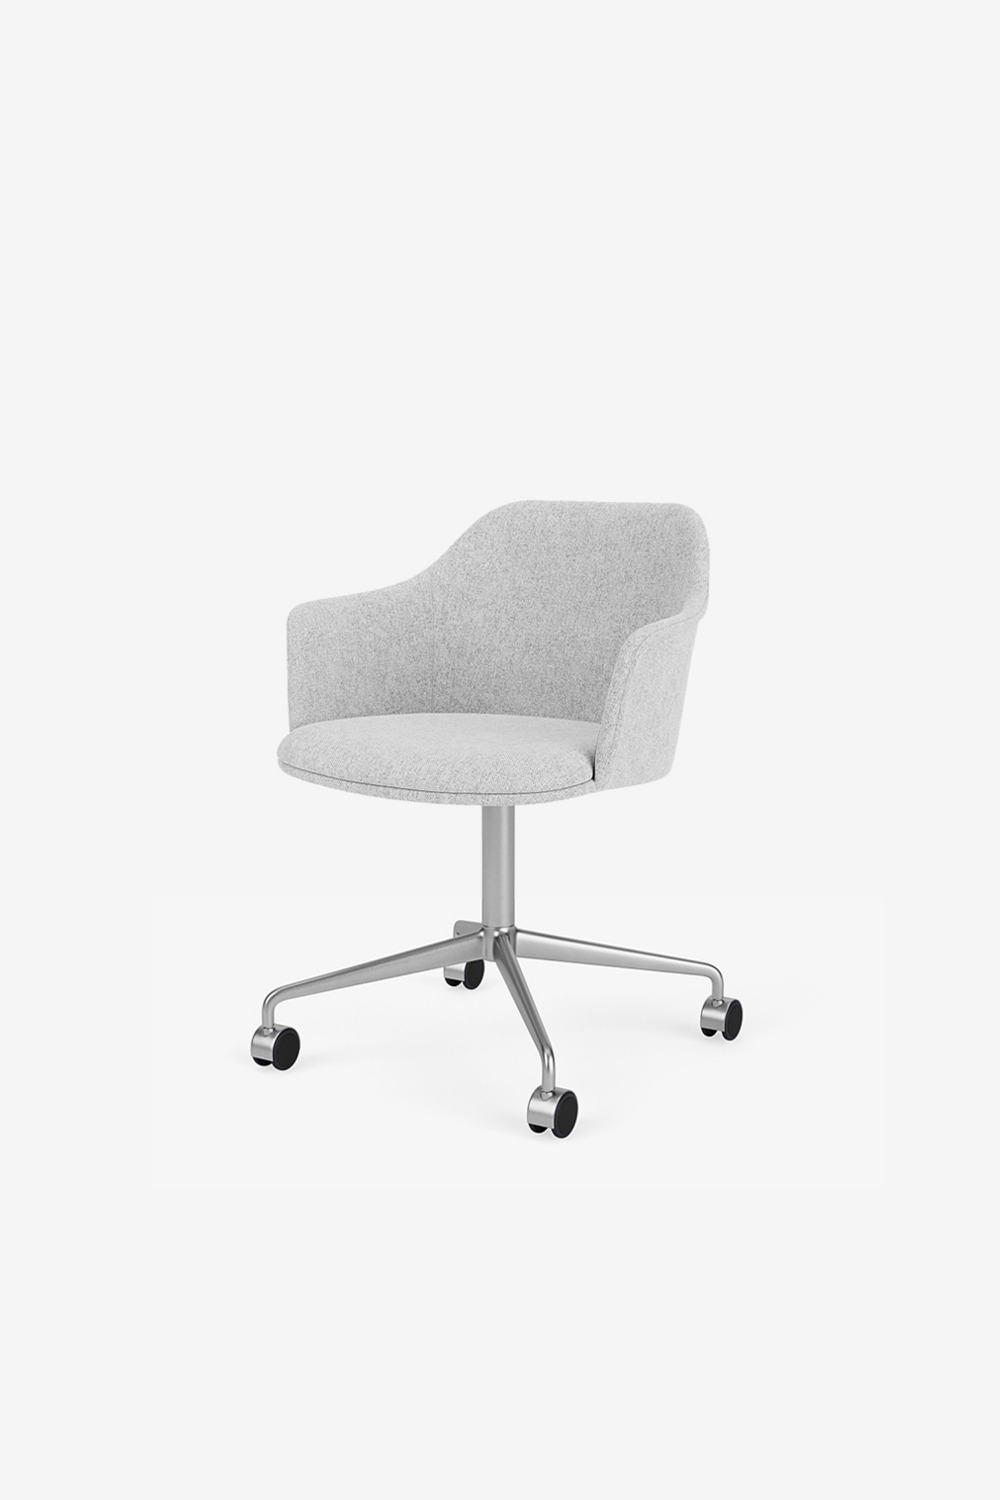 [&amp;Tradition] Rely Chair/ HW51 (Hallingdal 116)